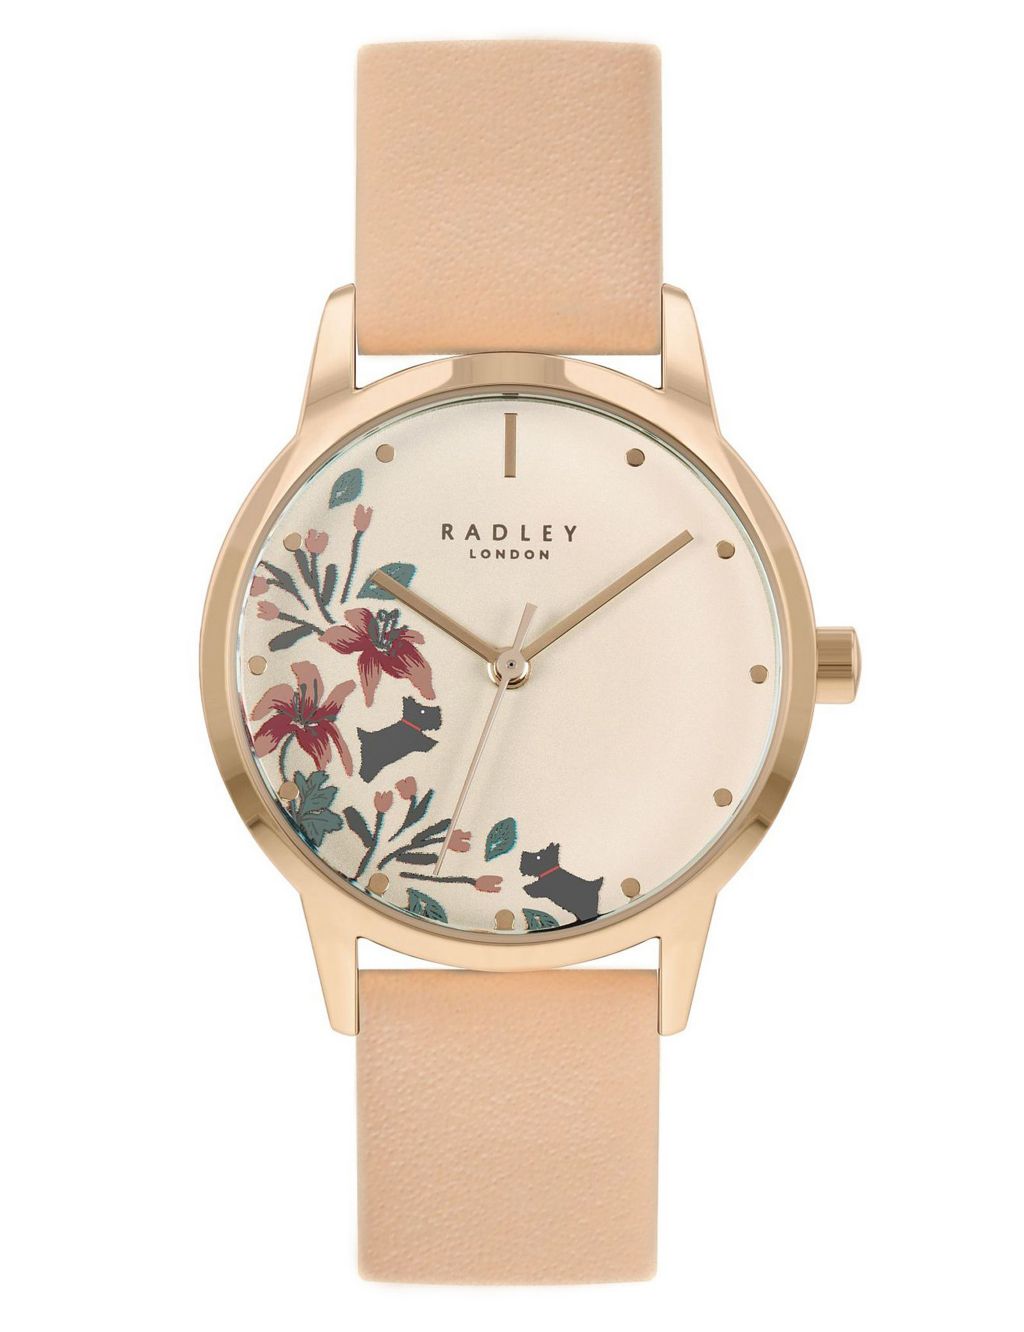 Radley Champagne Leather Watch image 1